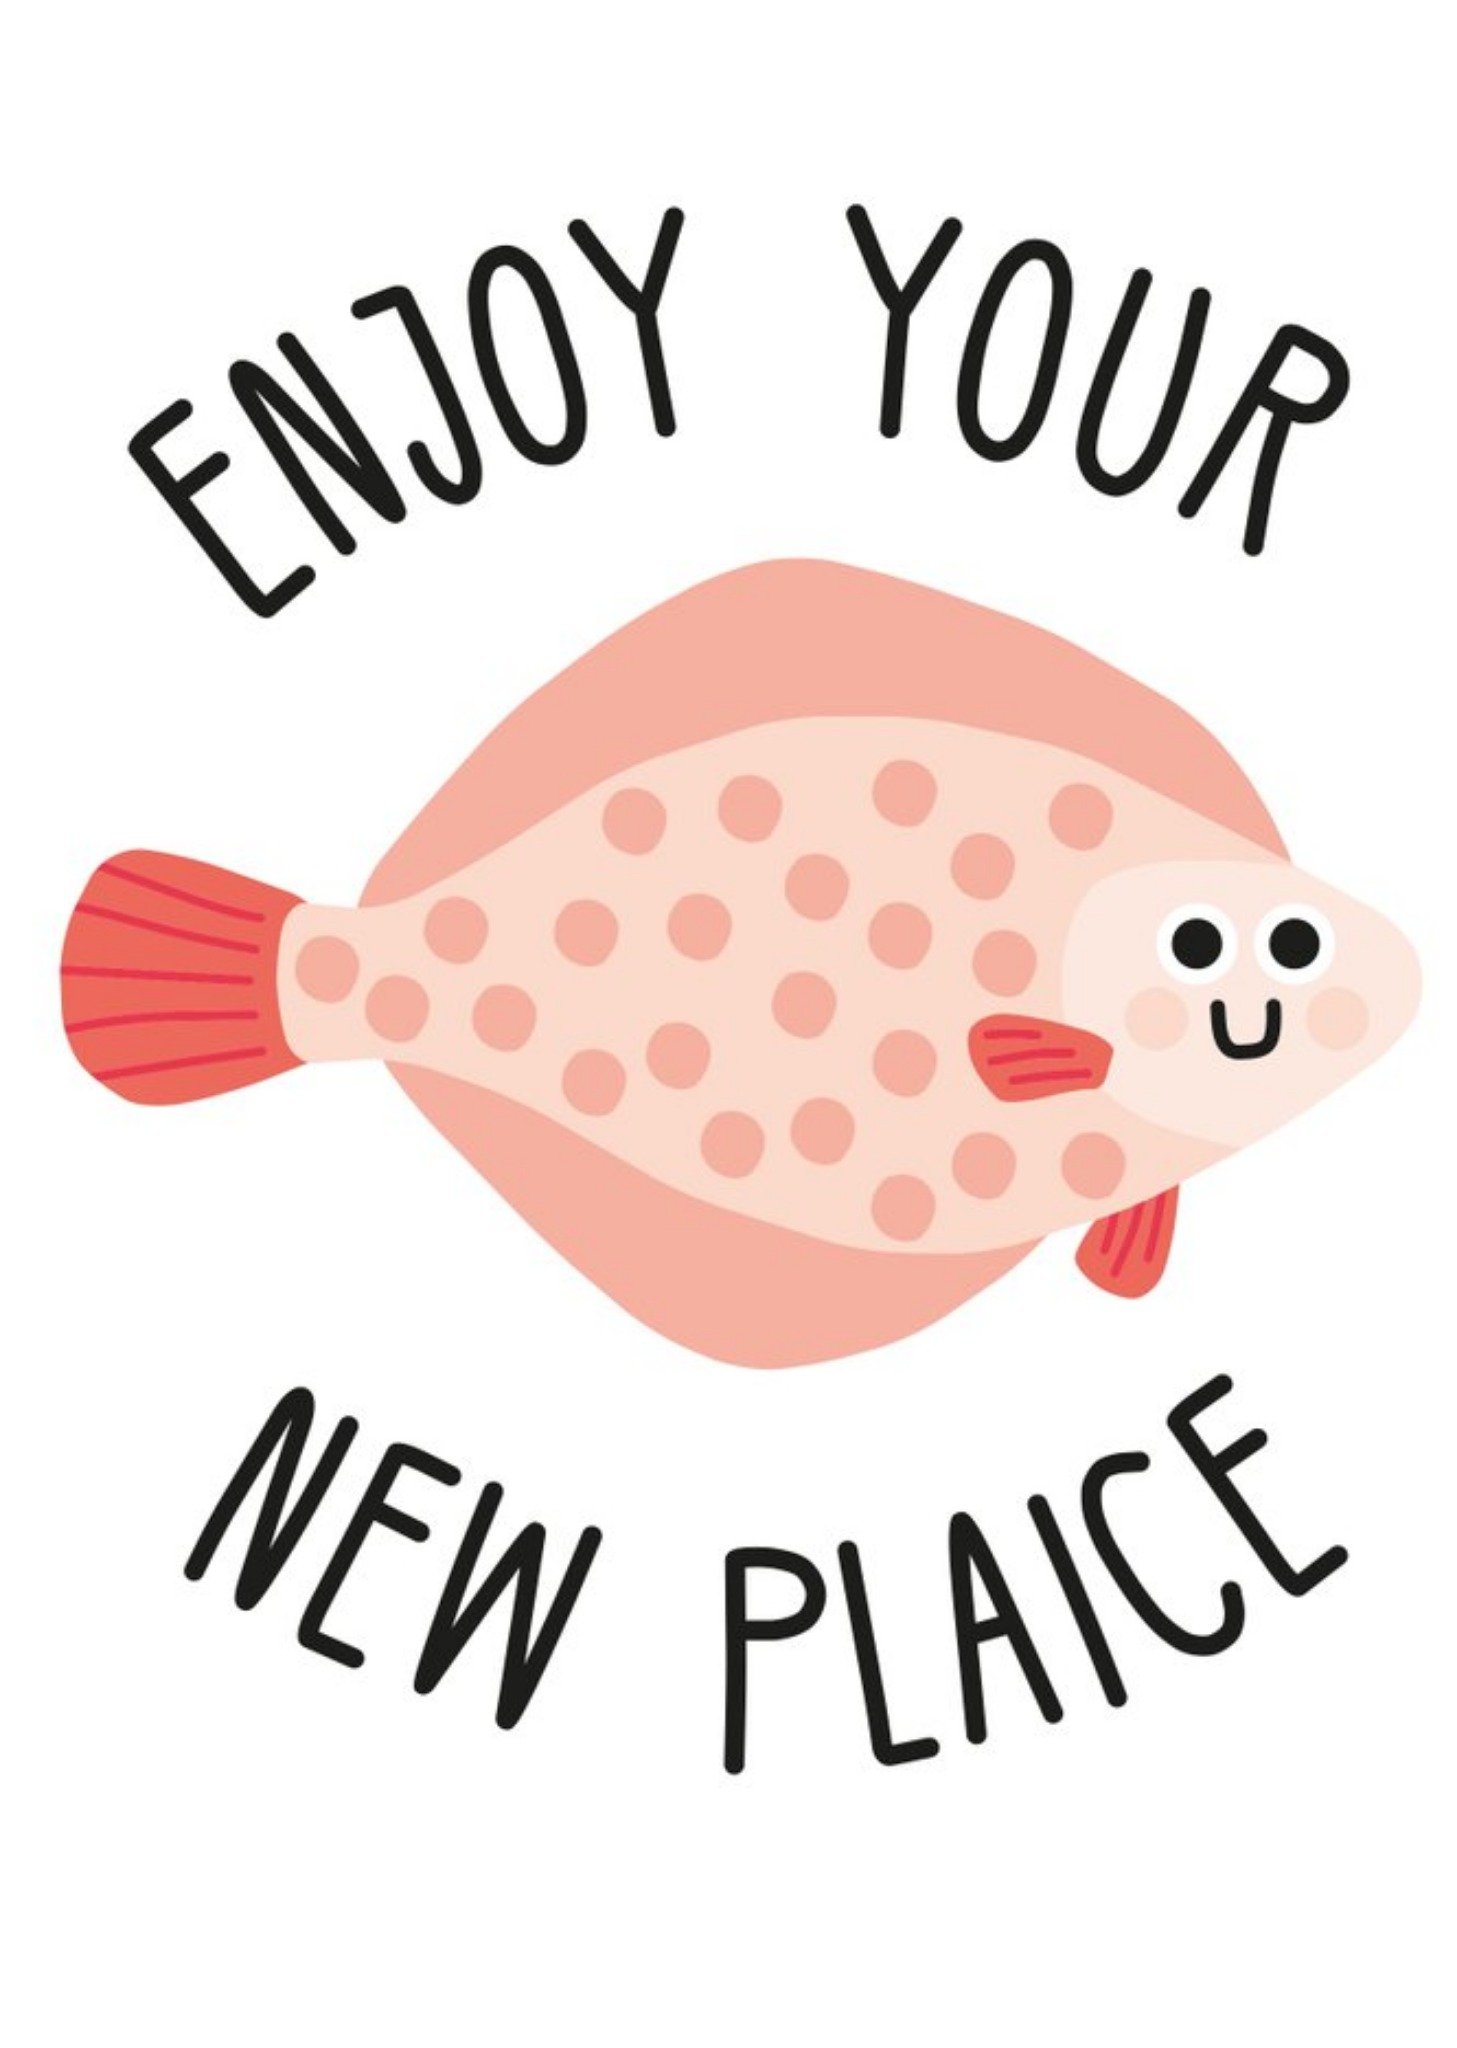 Moonpig Illustration Of A Fish Enjoy Your New Plaice Funny Pun New Home Card Ecard